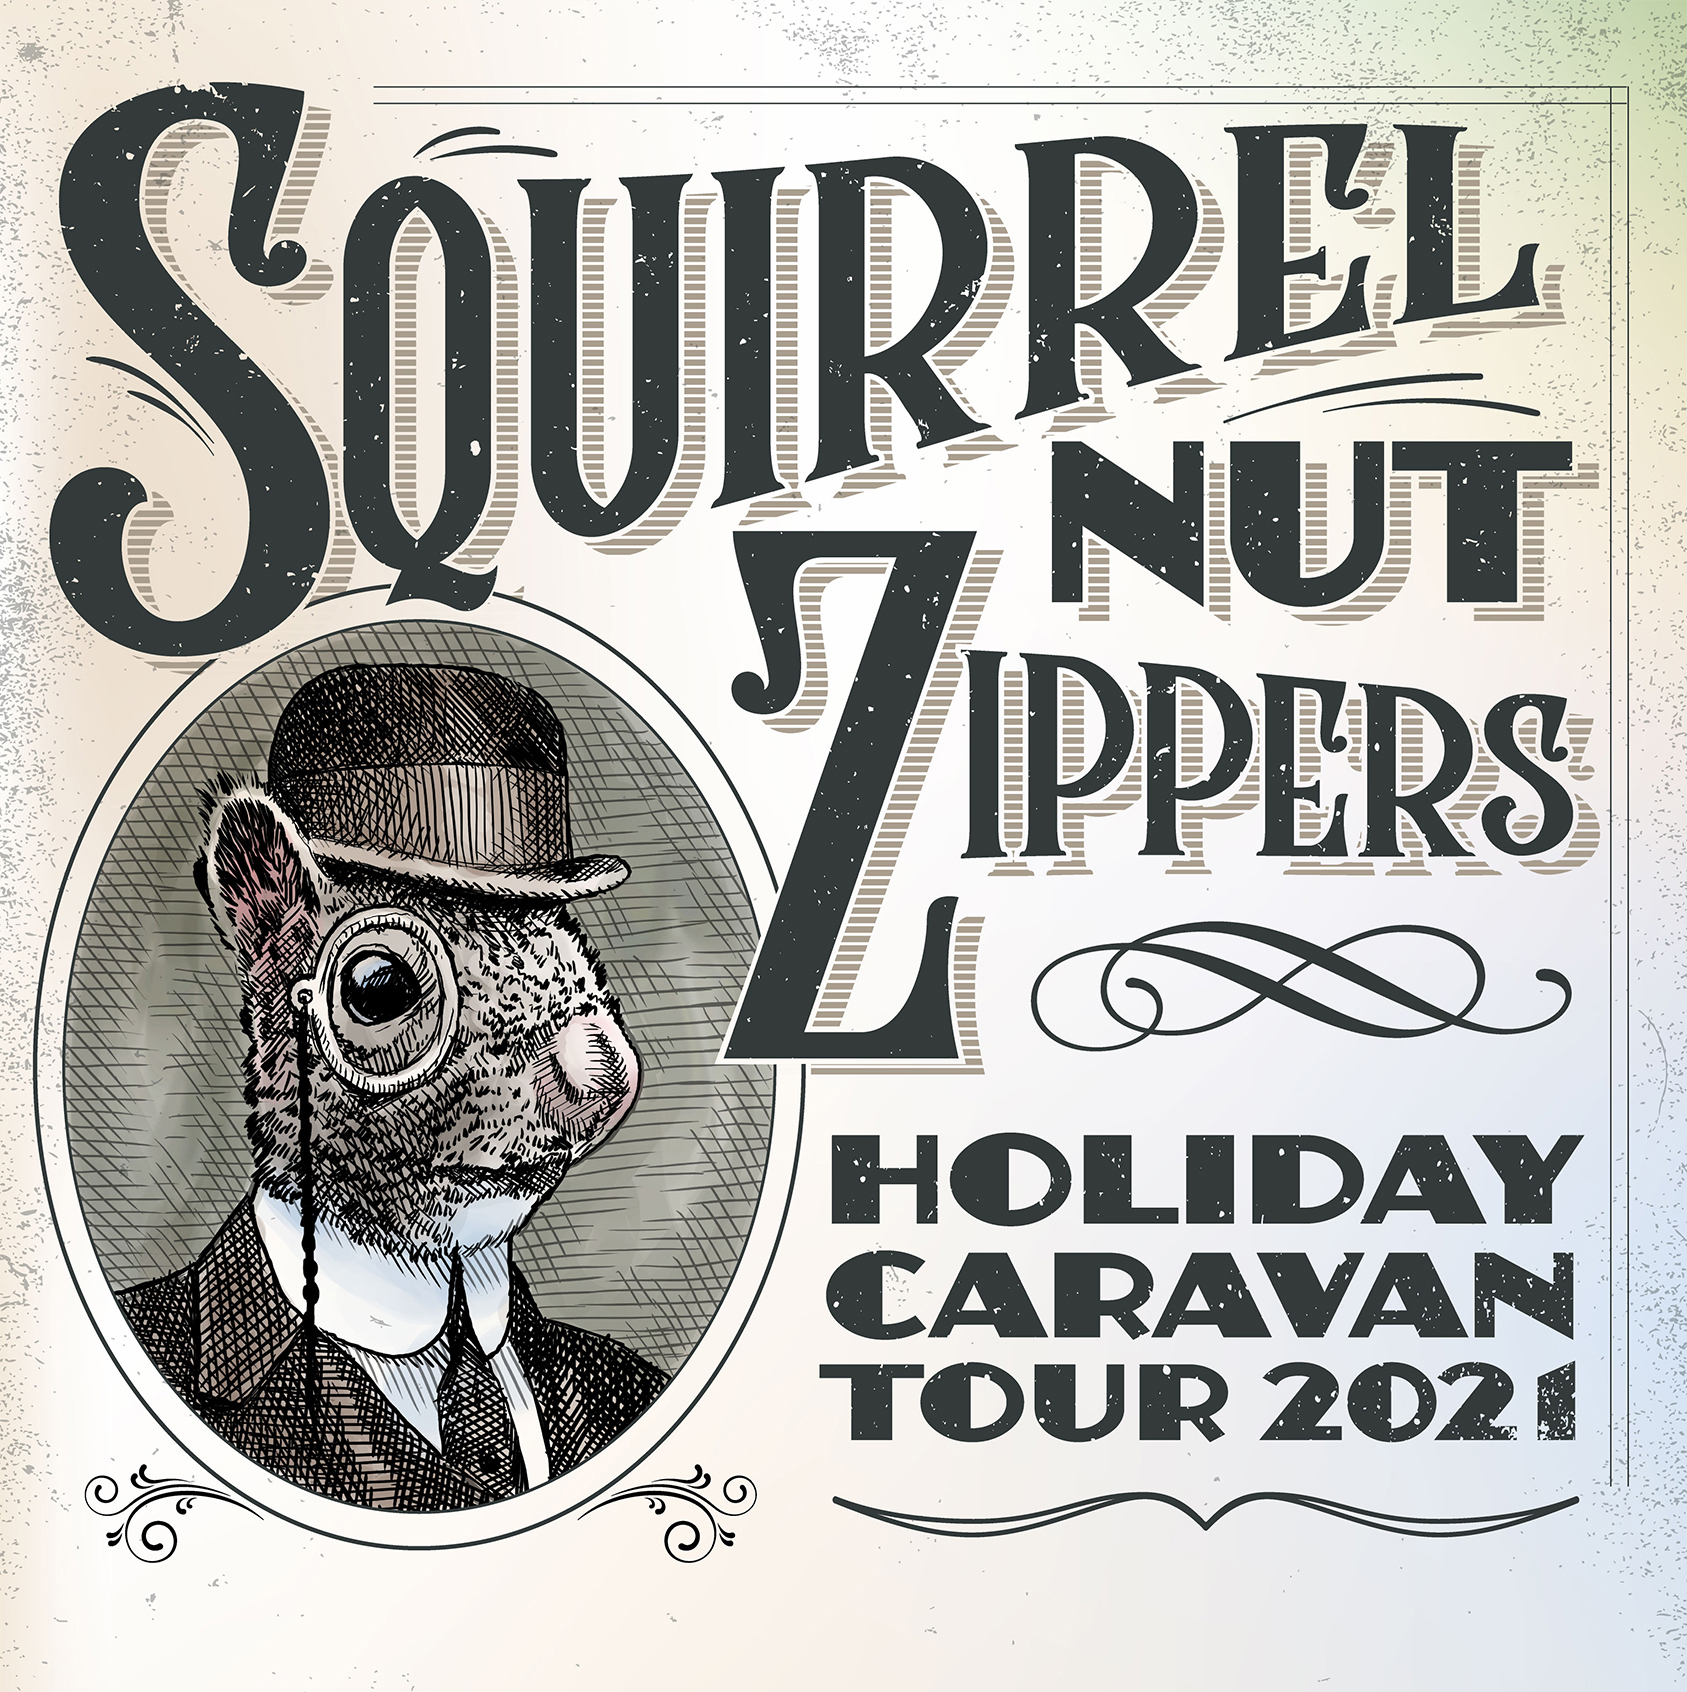 Poster graphic with a squirrel in a suit with top hat and eye glass on chain. The poster has a white tonal background and says Squirrel Nut Zippers Holiday Caravan Tour 2021.